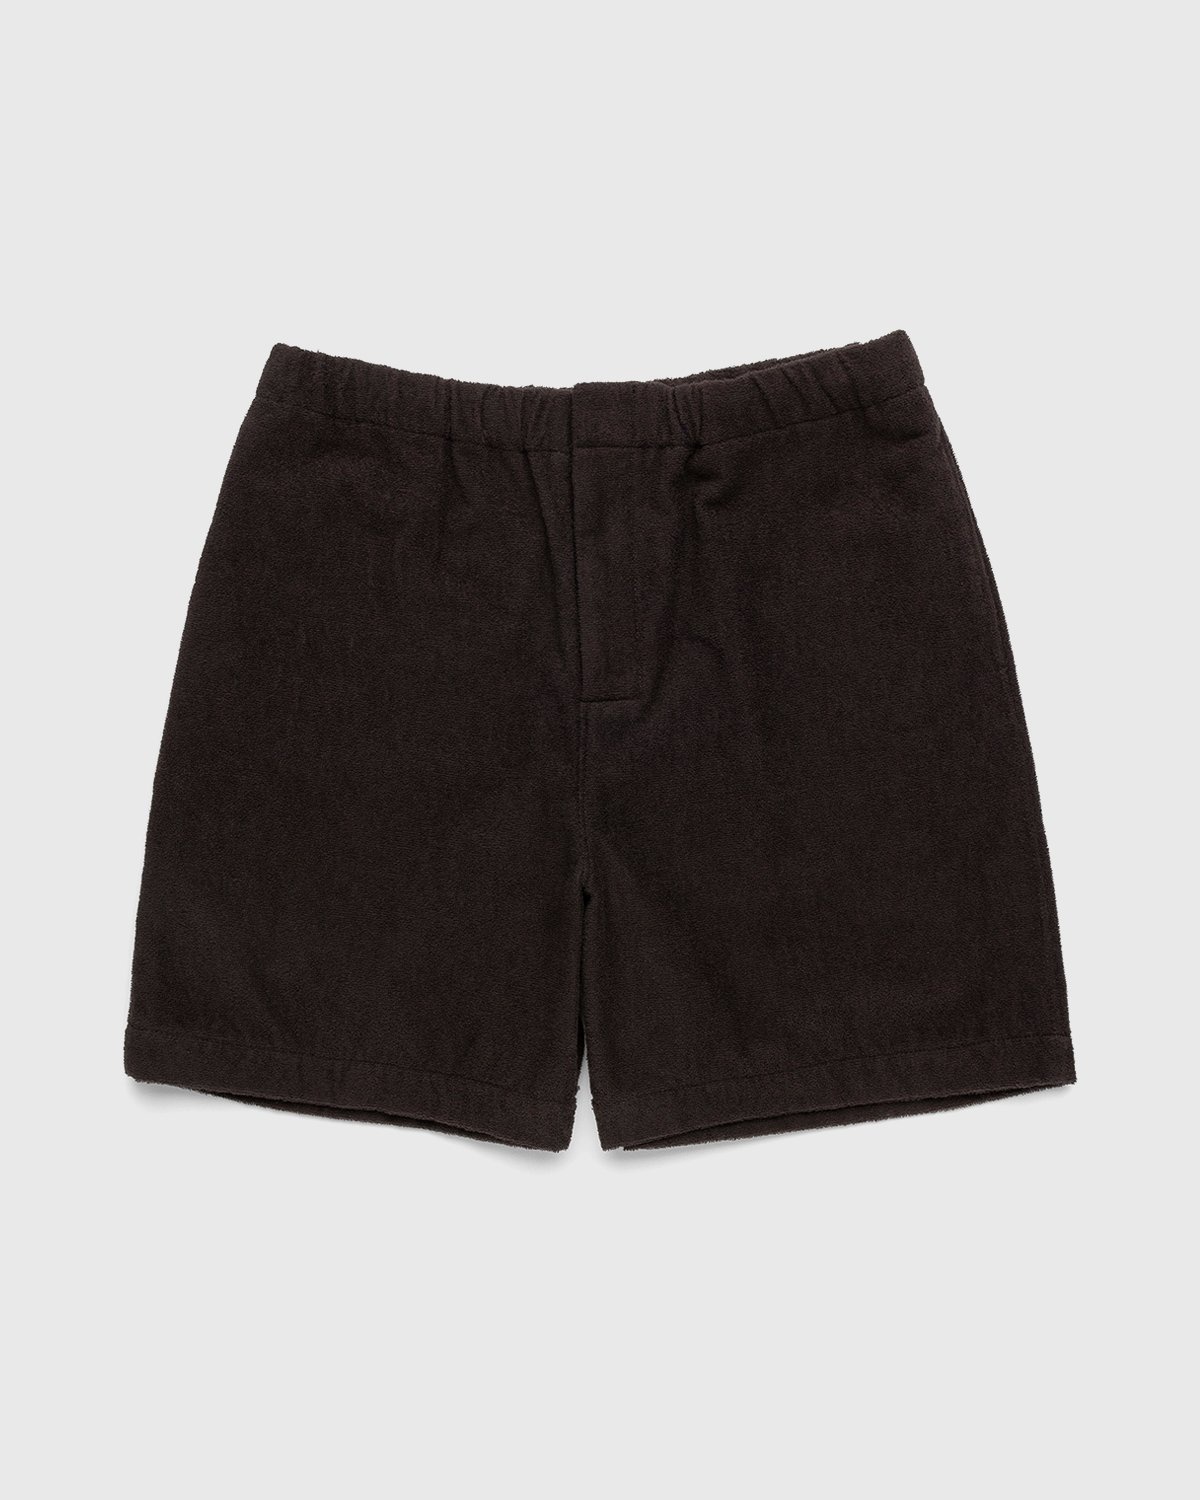 Auralee – Cotton Terry Cloth Shorts Brown - Shorts - Brown - Image 1